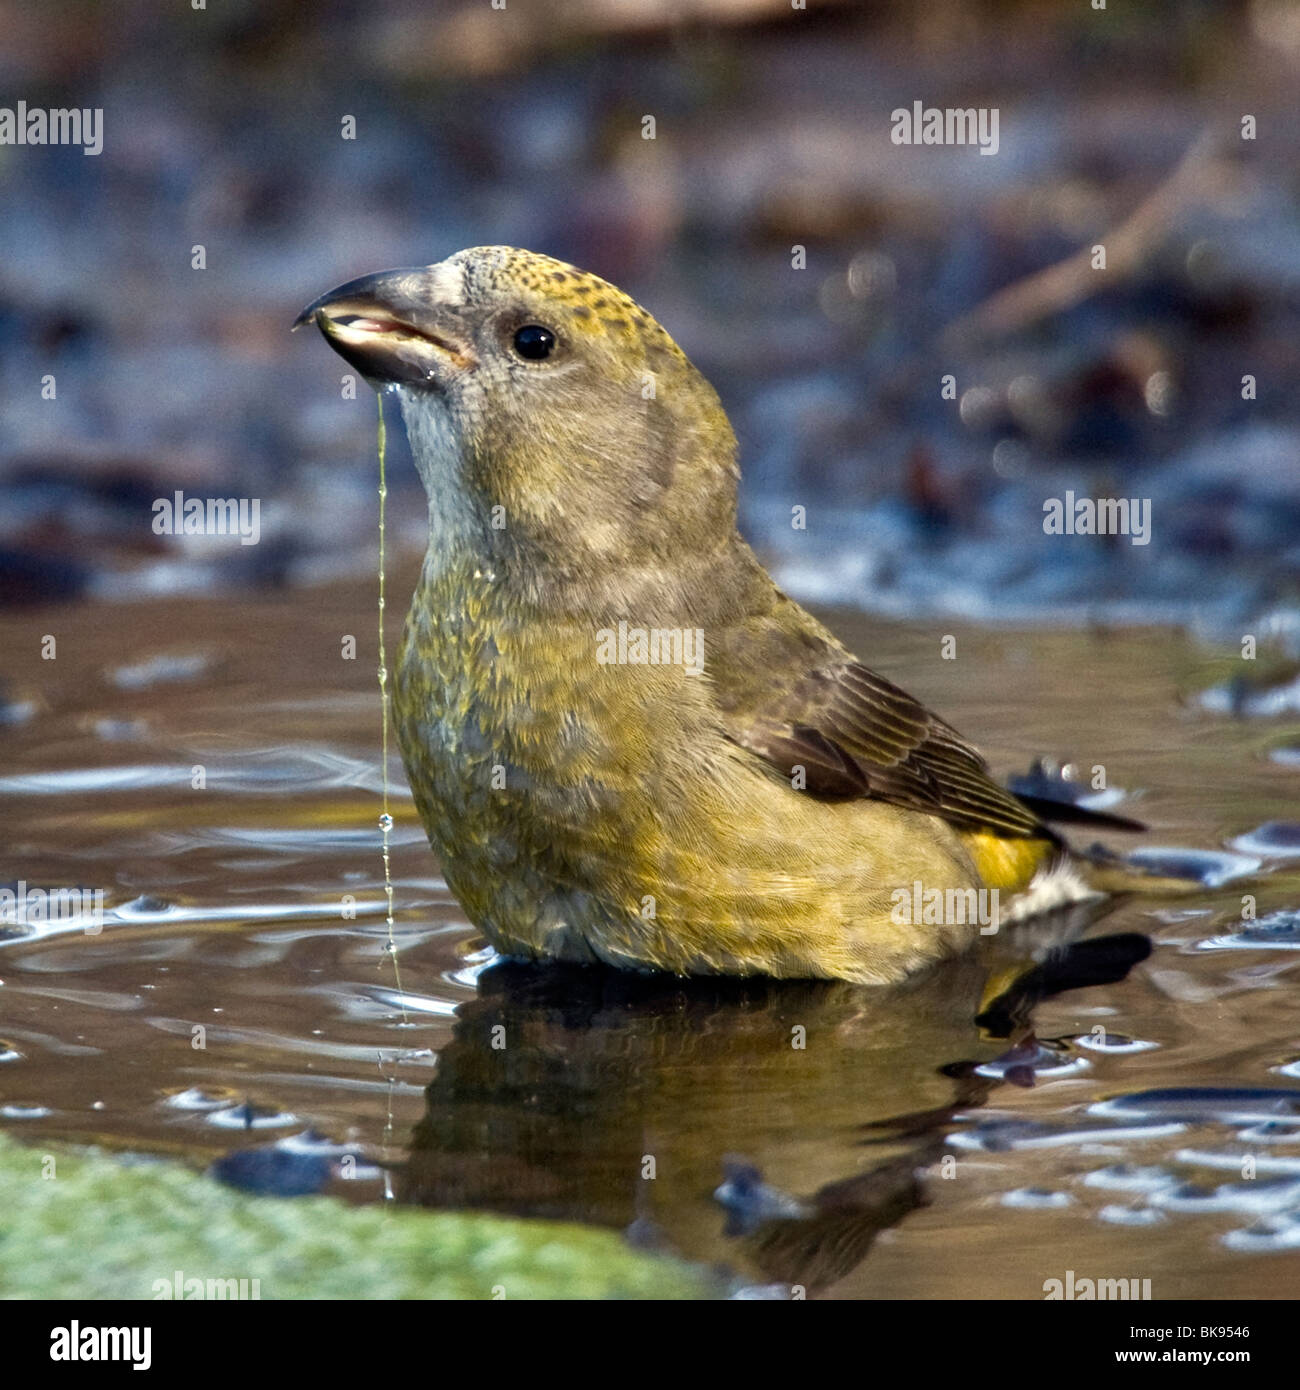 Common Crossbill High Resolution Stock Photography and Images - Alamy